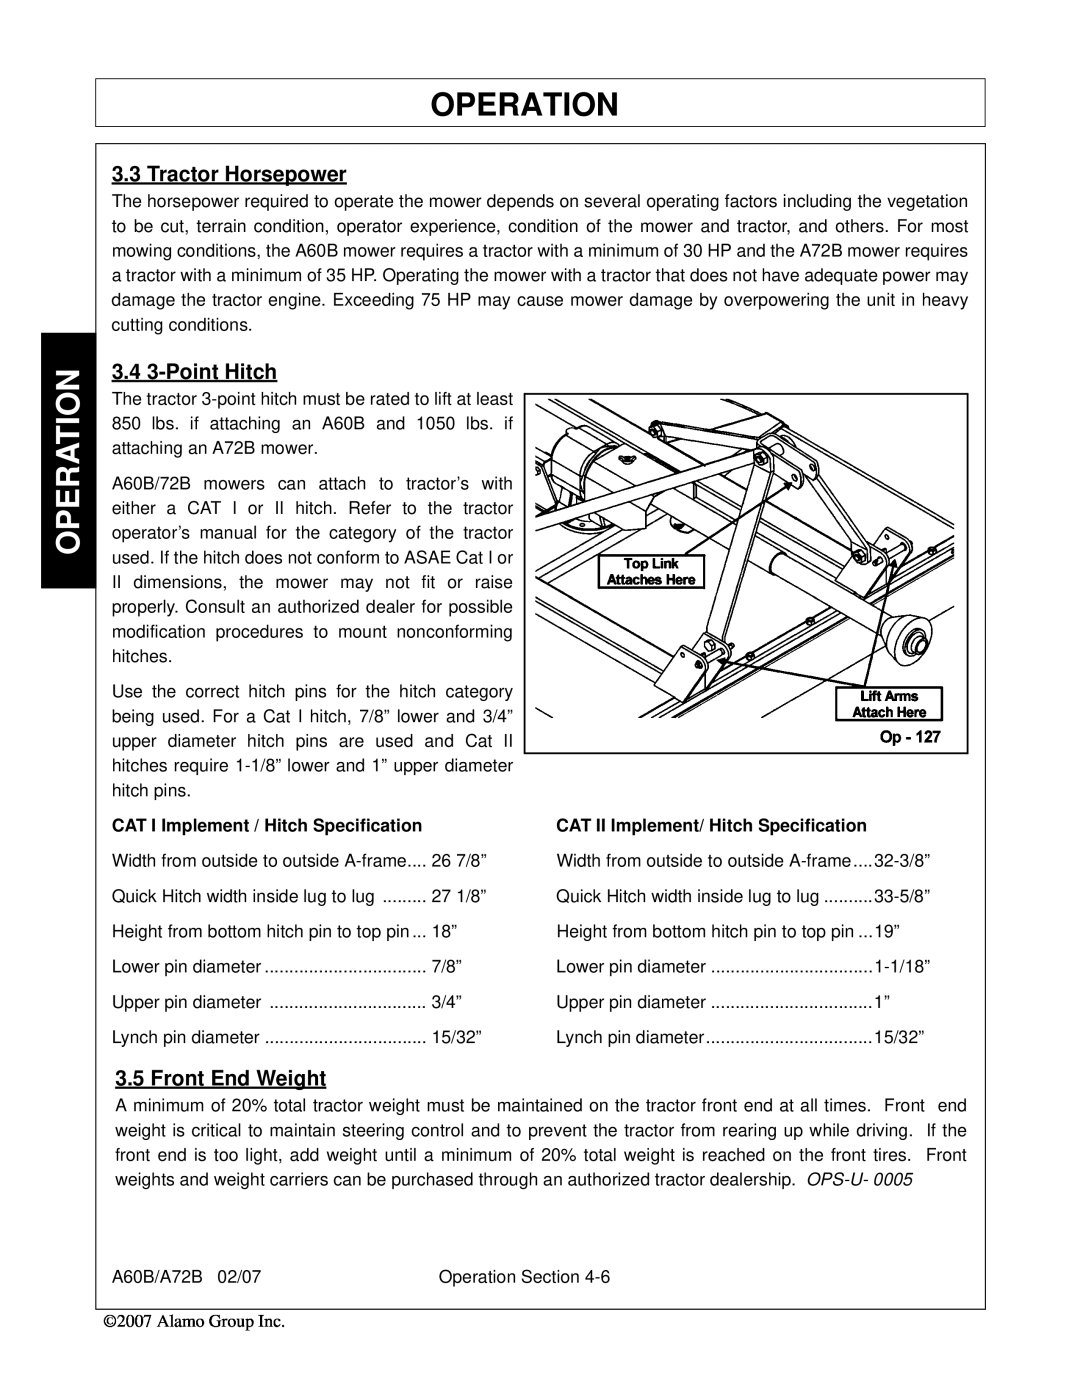 Alamo 00759354C Tractor Horsepower, 3.4 3-Point Hitch, Front End Weight, Operation, CAT I Implement / Hitch Specification 